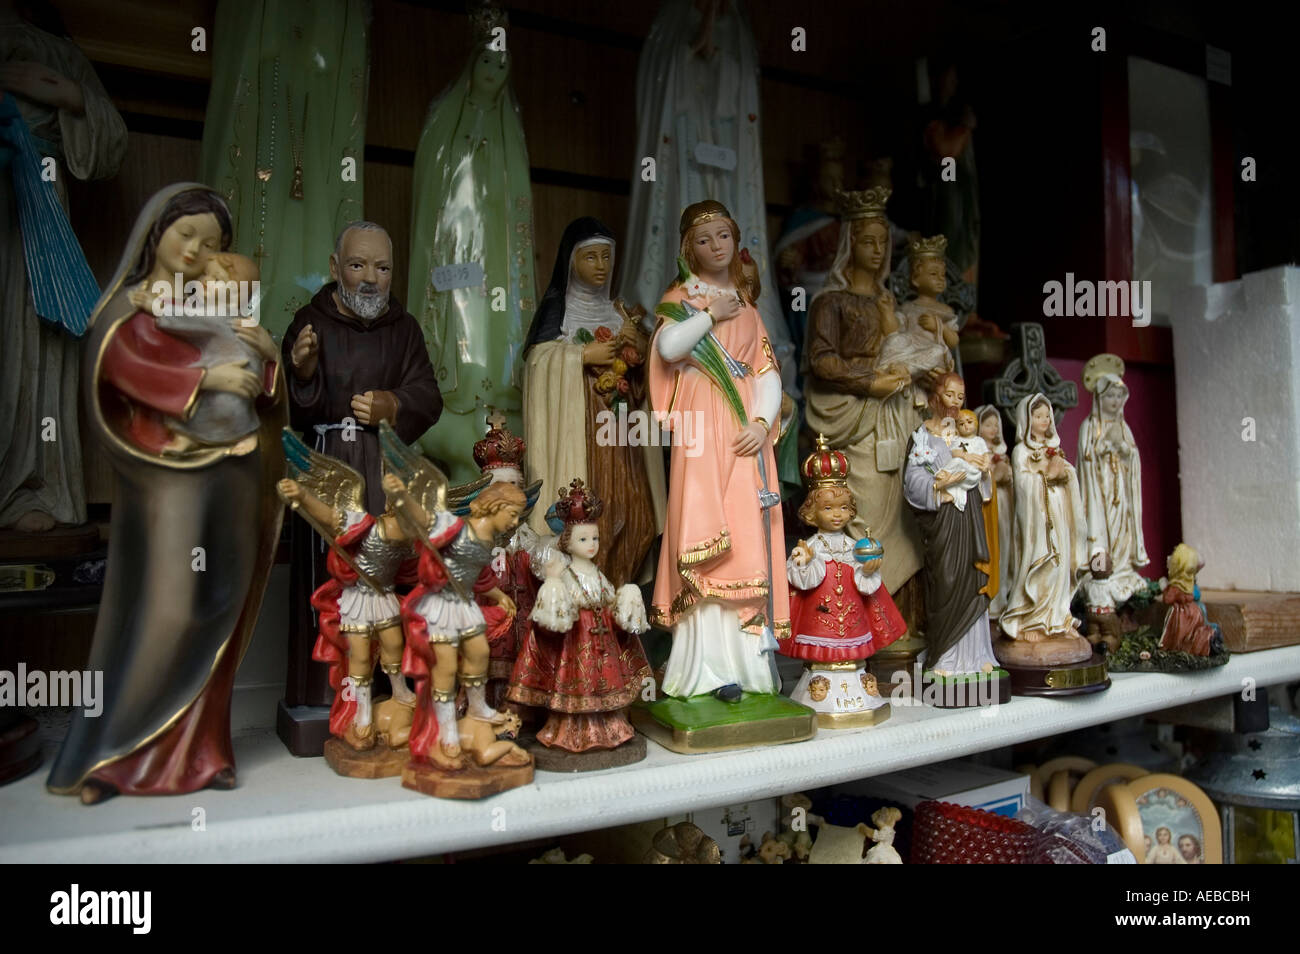 Religious souvenirs on sale at Knock, County Mayo, Ireland Stock Photo